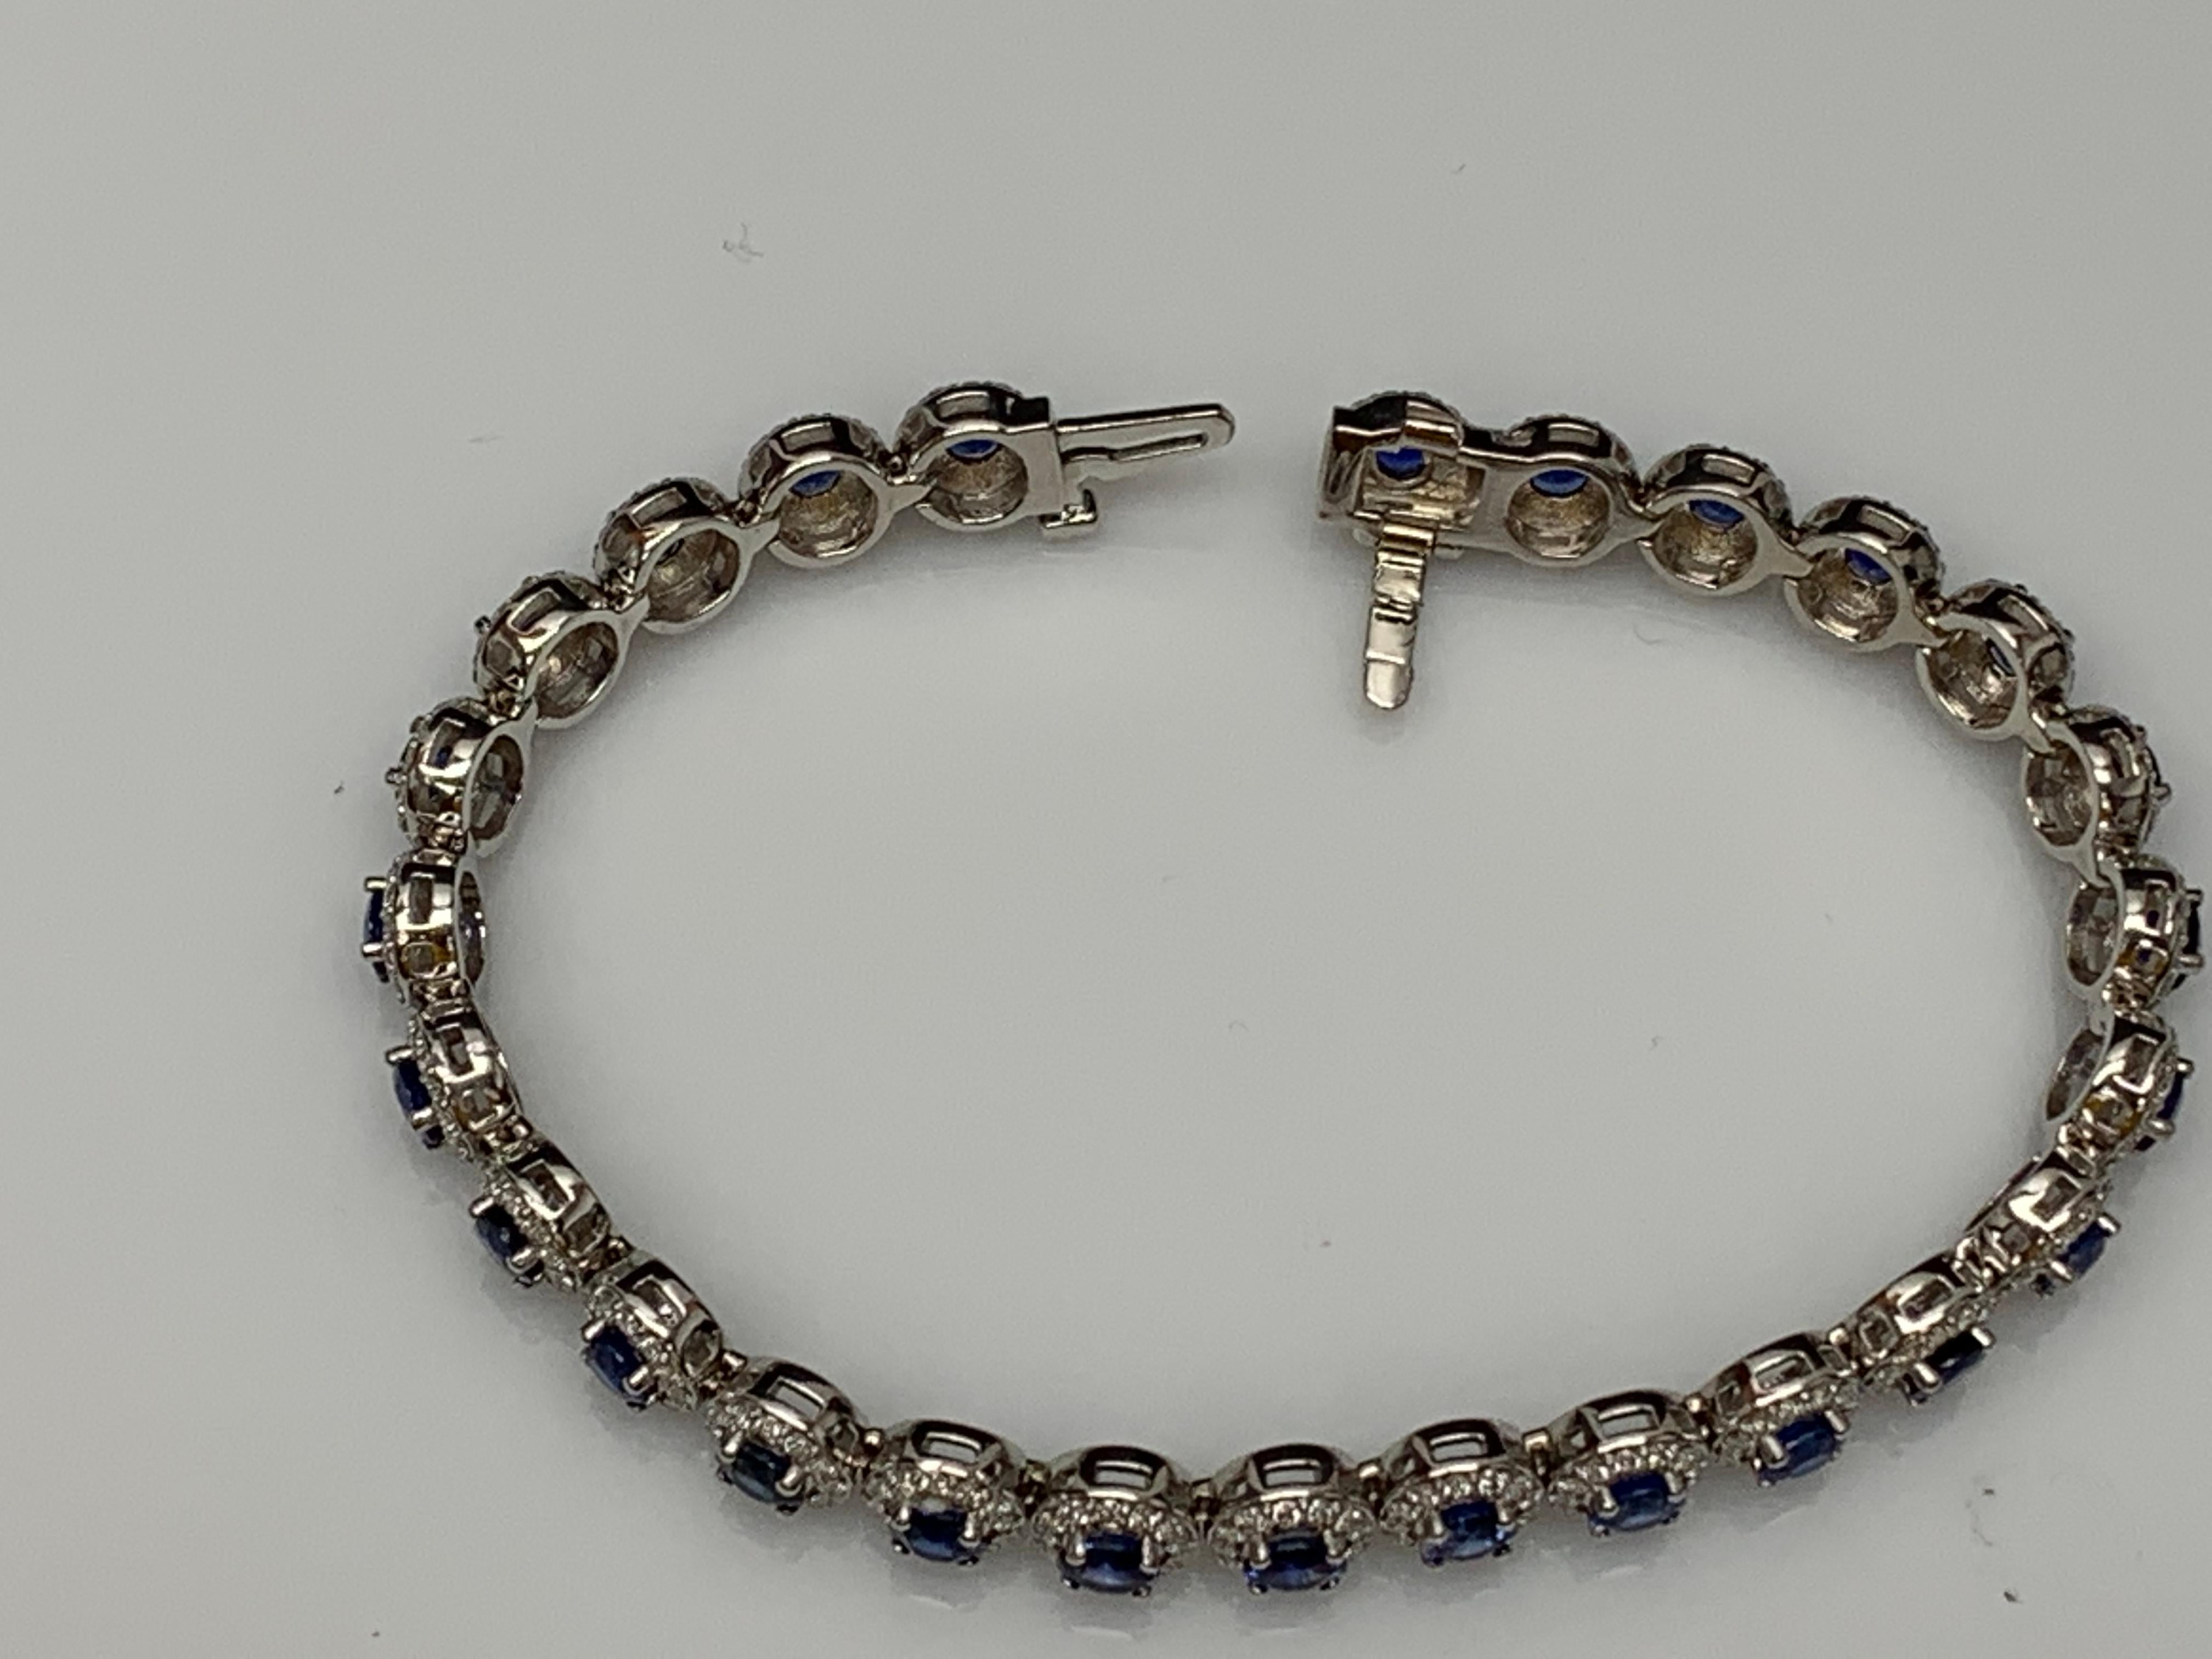 7.47 Carat Blue Sapphire and Diamond Halo Tennis Bracelet in 14k White Gold For Sale 8